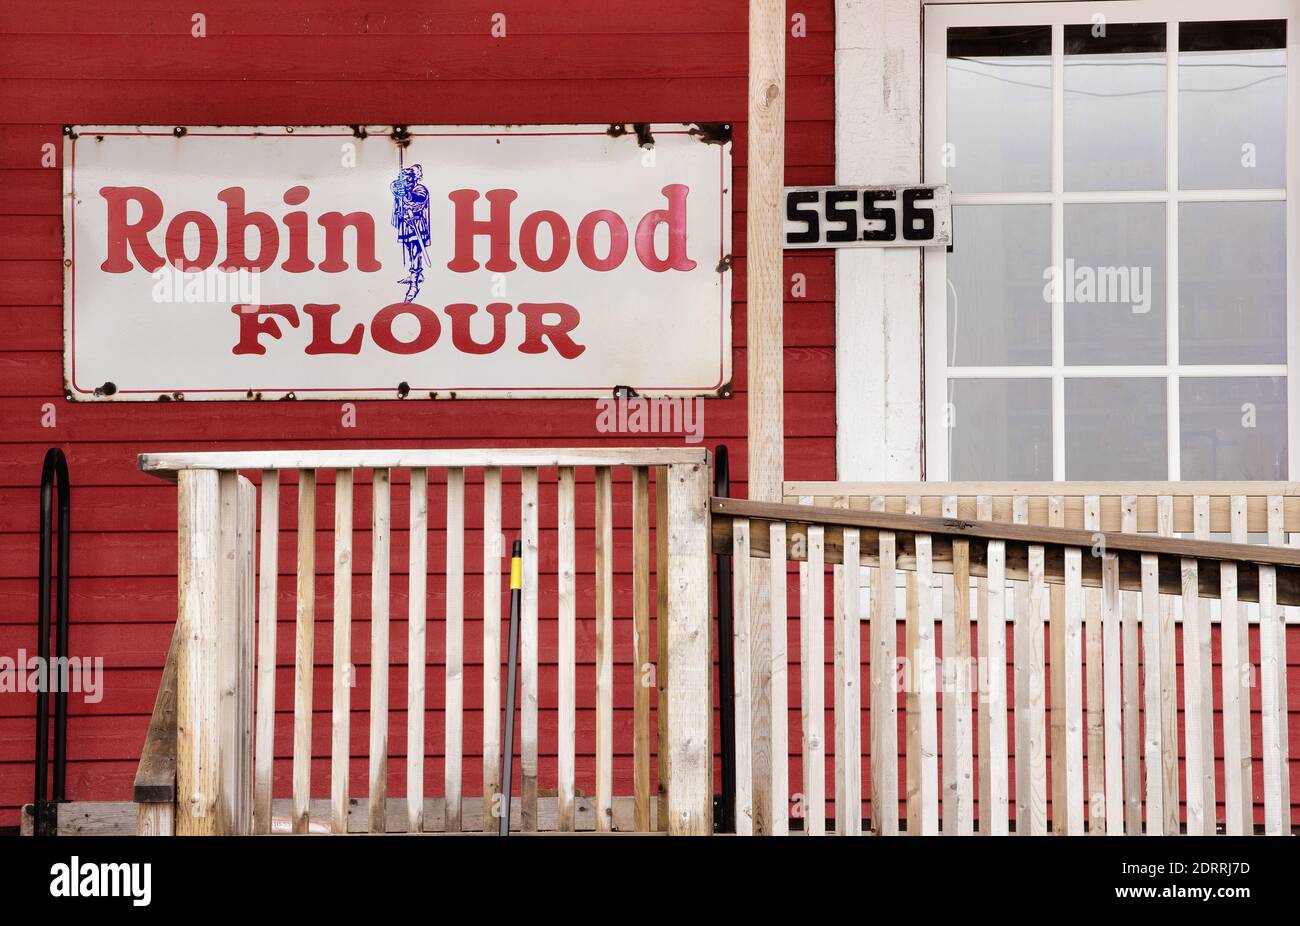 Earltown, Canada - May 07, 2016: Vintage Robin Hood Flour sign. Robin Hood Flour is a popular flour brand produced by Horizon Milling. Stock Photo